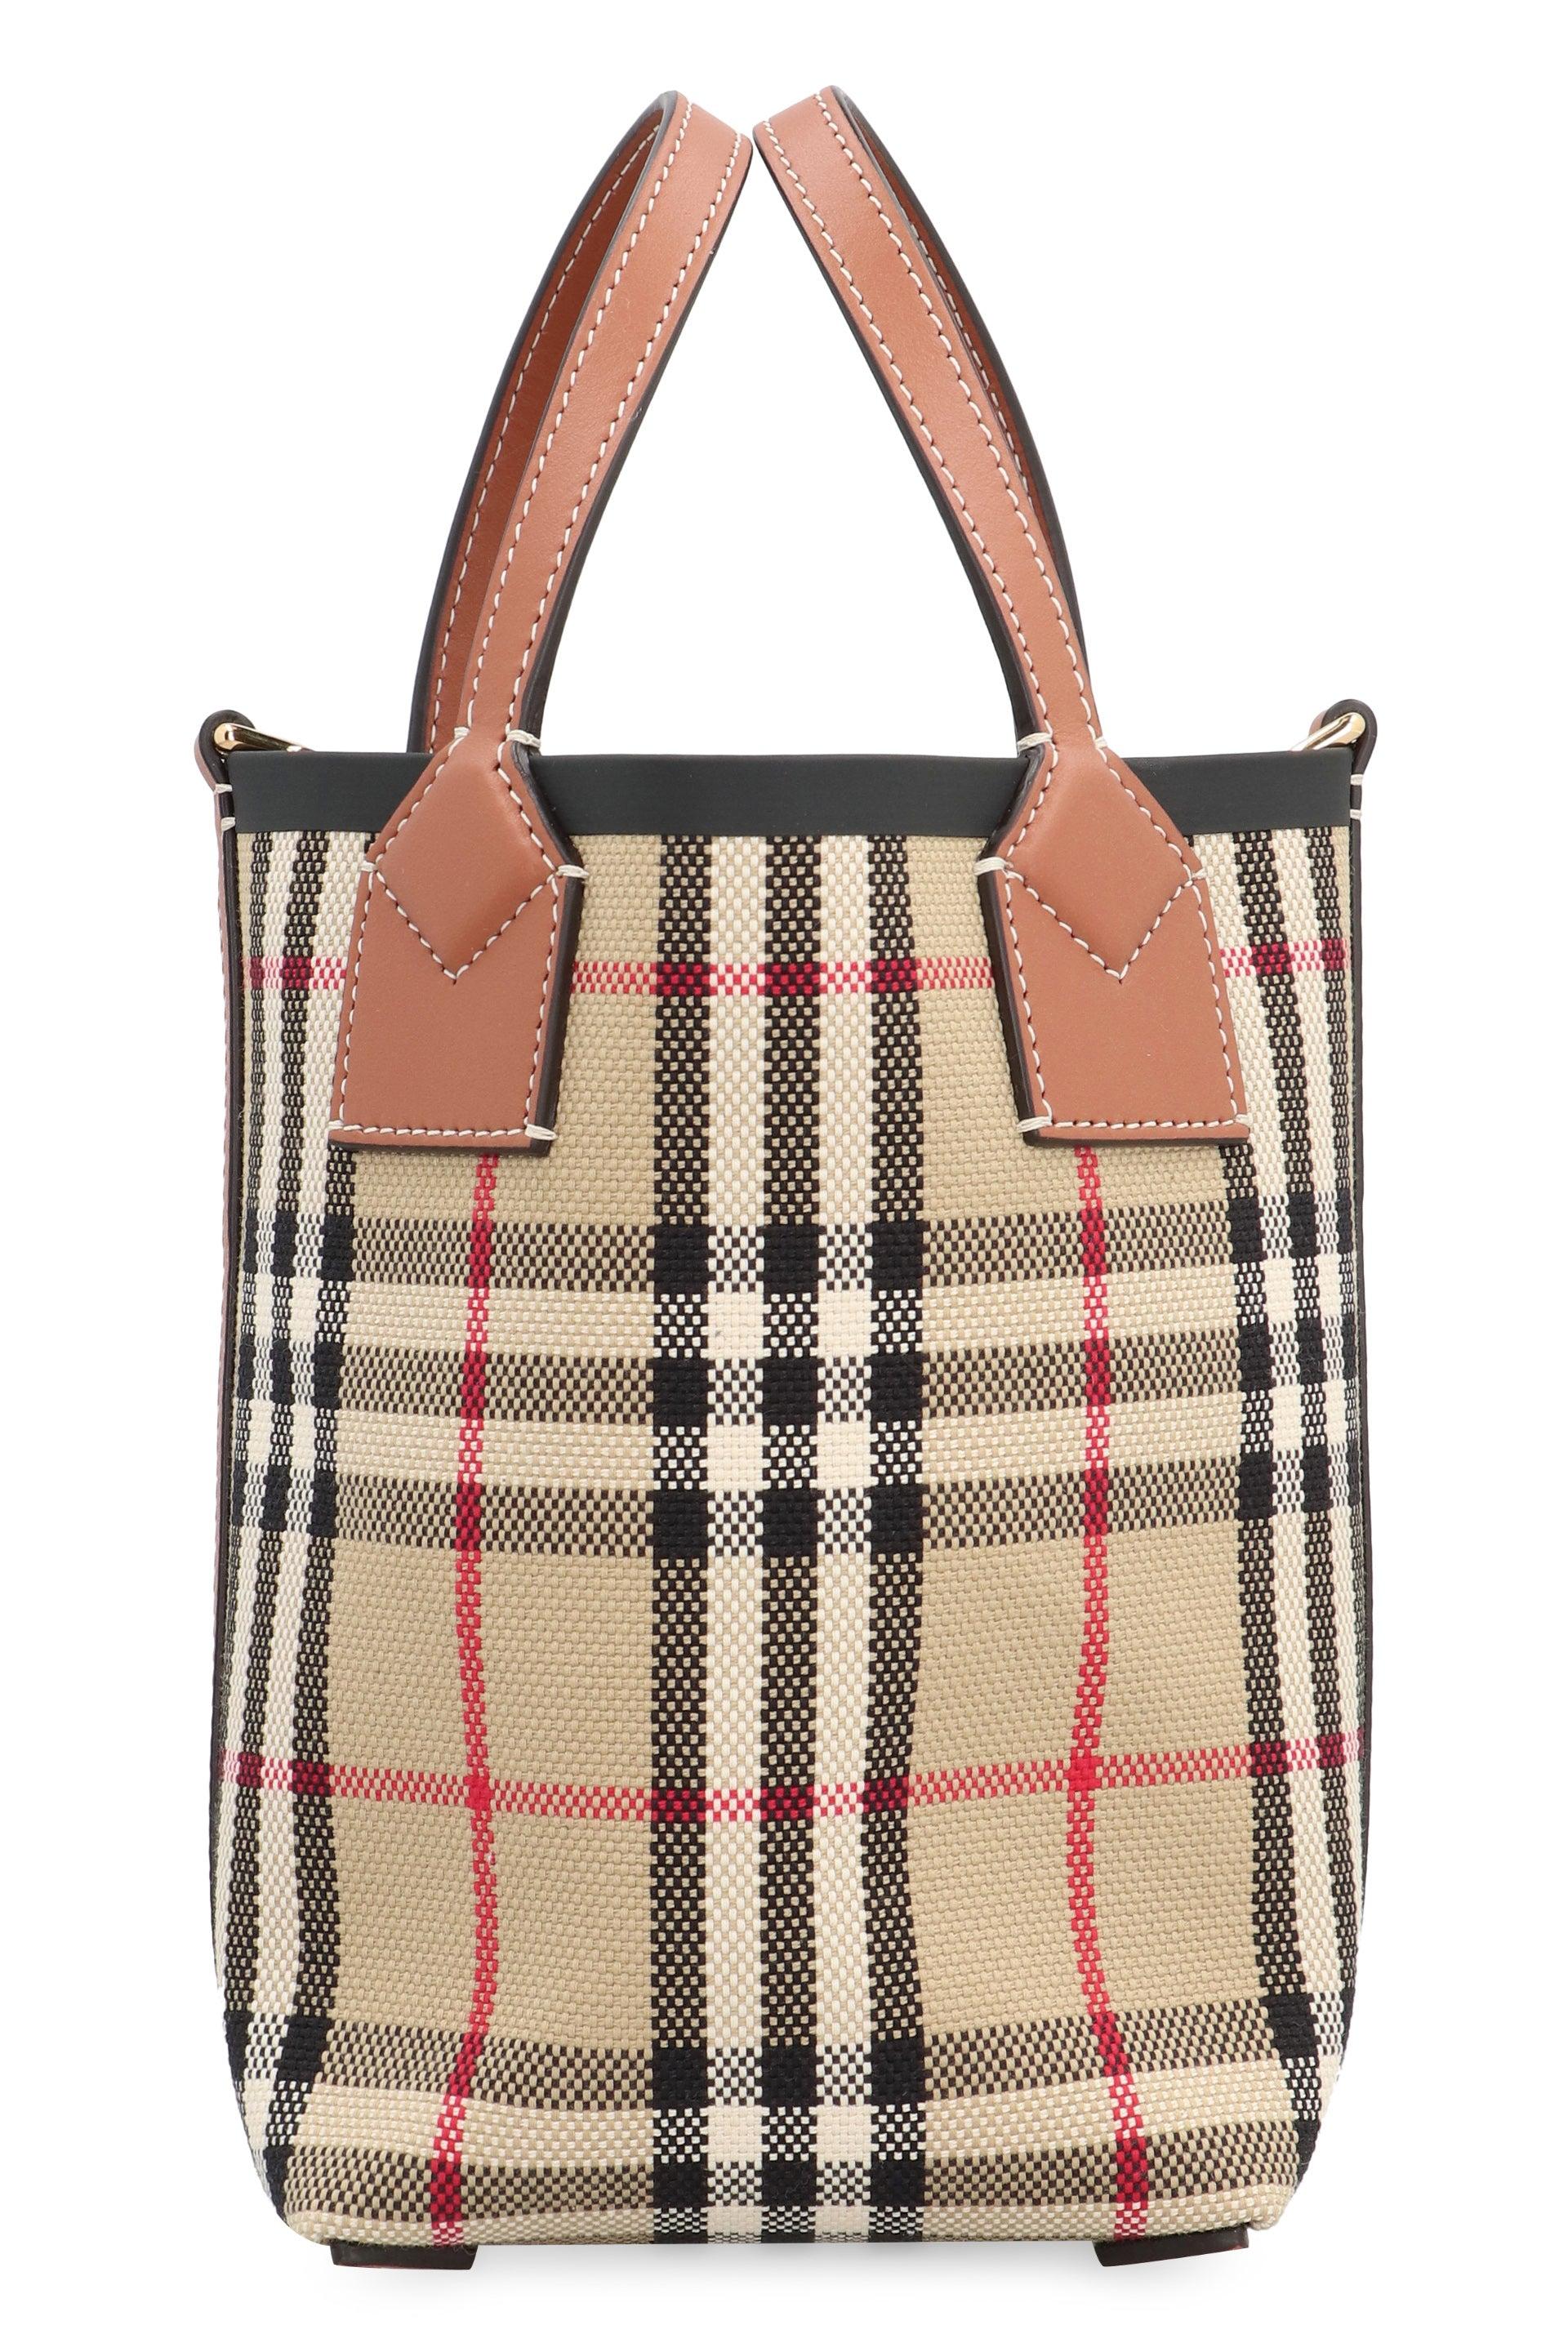 Burberry London Canvas Bucket Bag in Natural